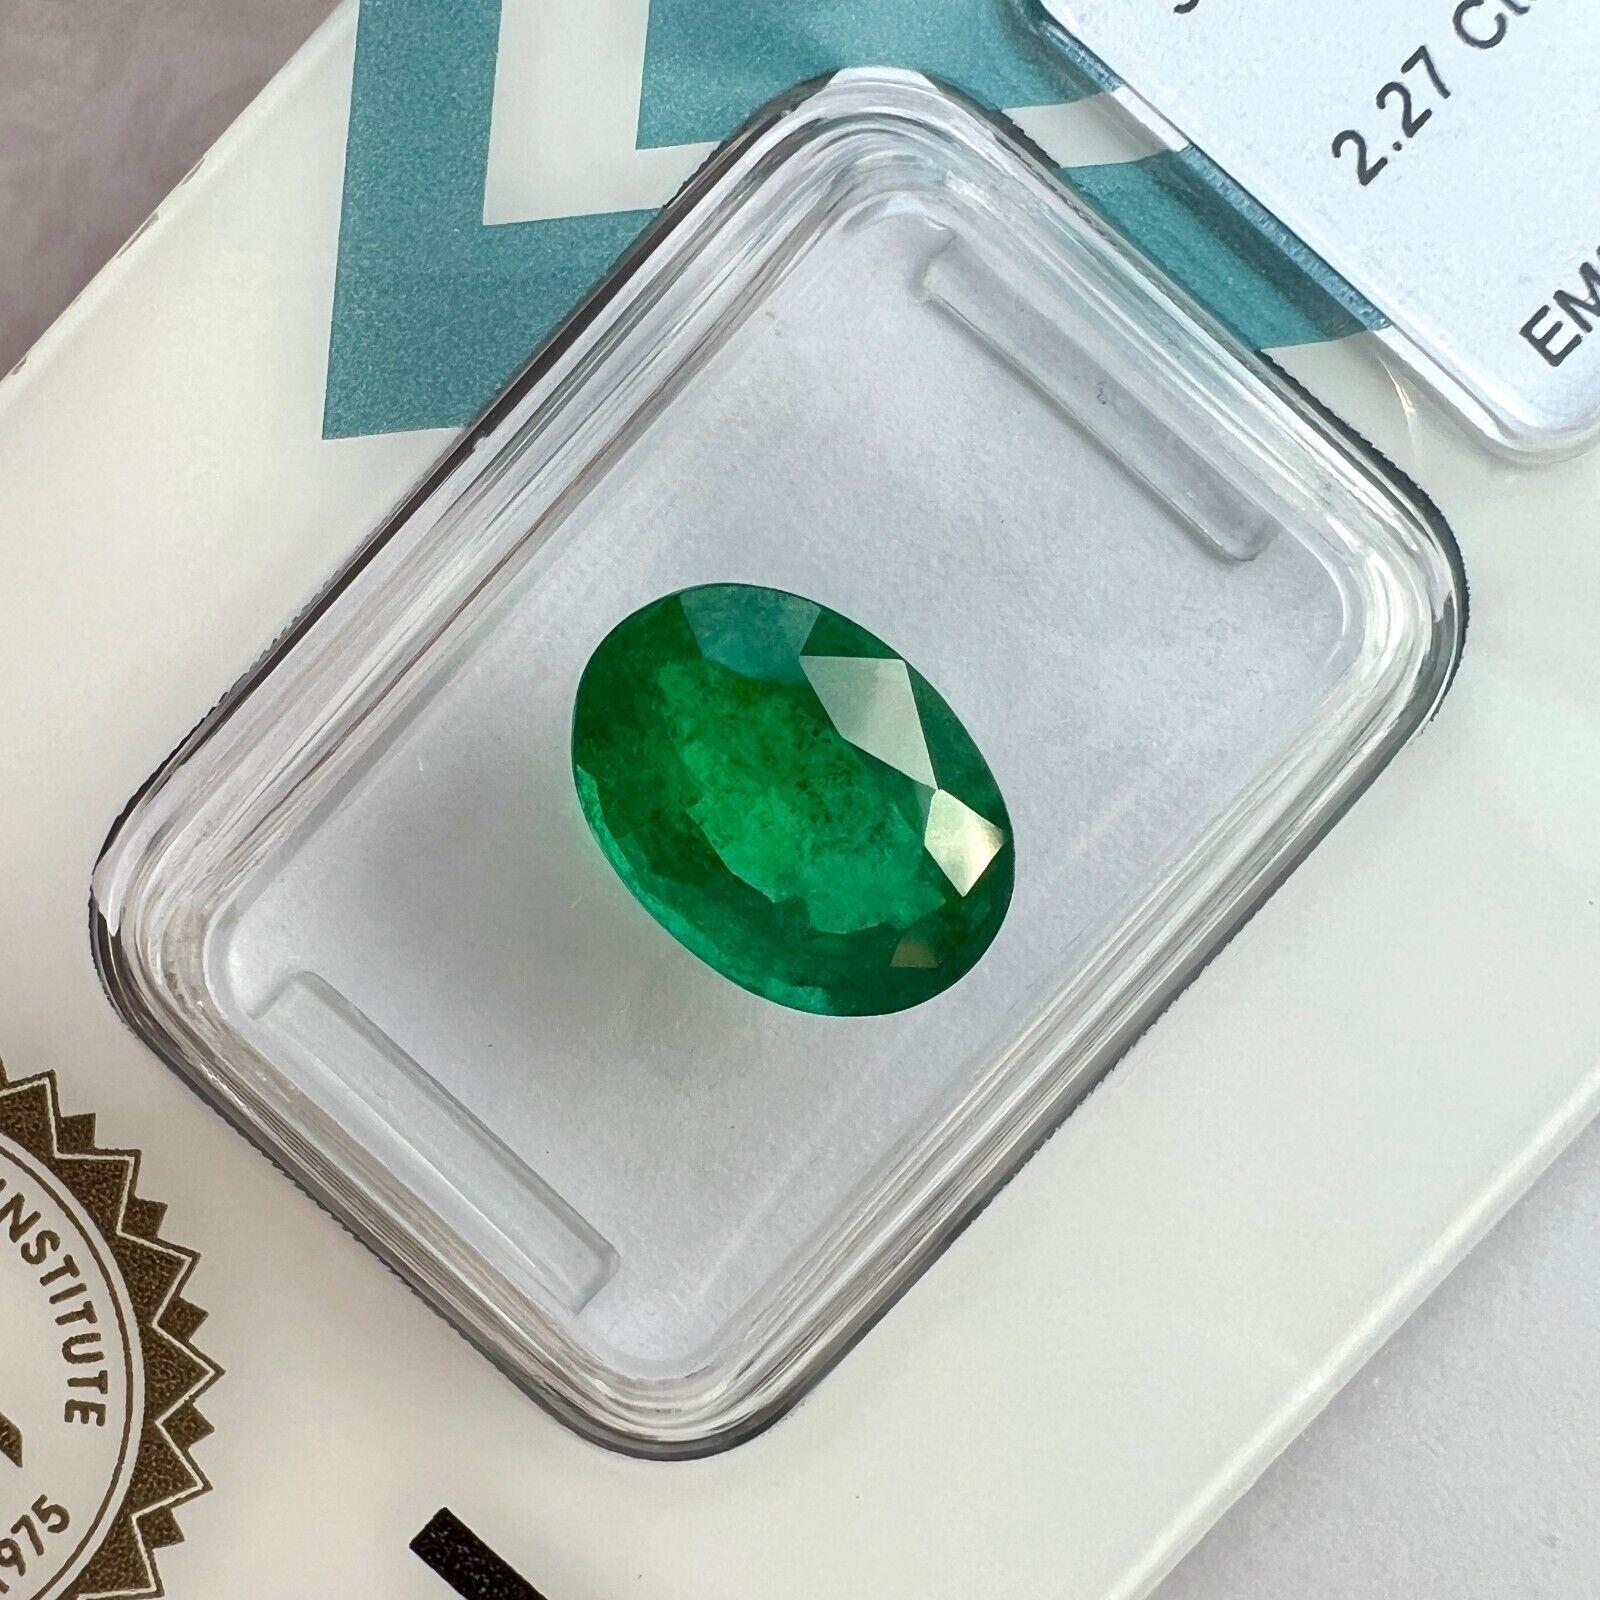 IGI Certified 2.27Ct Deep Green Natural Emerald Oval Cut Minor Oil Loose Gem

IGI Certified Natural Oval Cut Deep Green Zambian Emerald Gemstone.
2.27 Carat emerald with a fine deep green colour. Even described by IGI as 'Good Colour Quality' Which